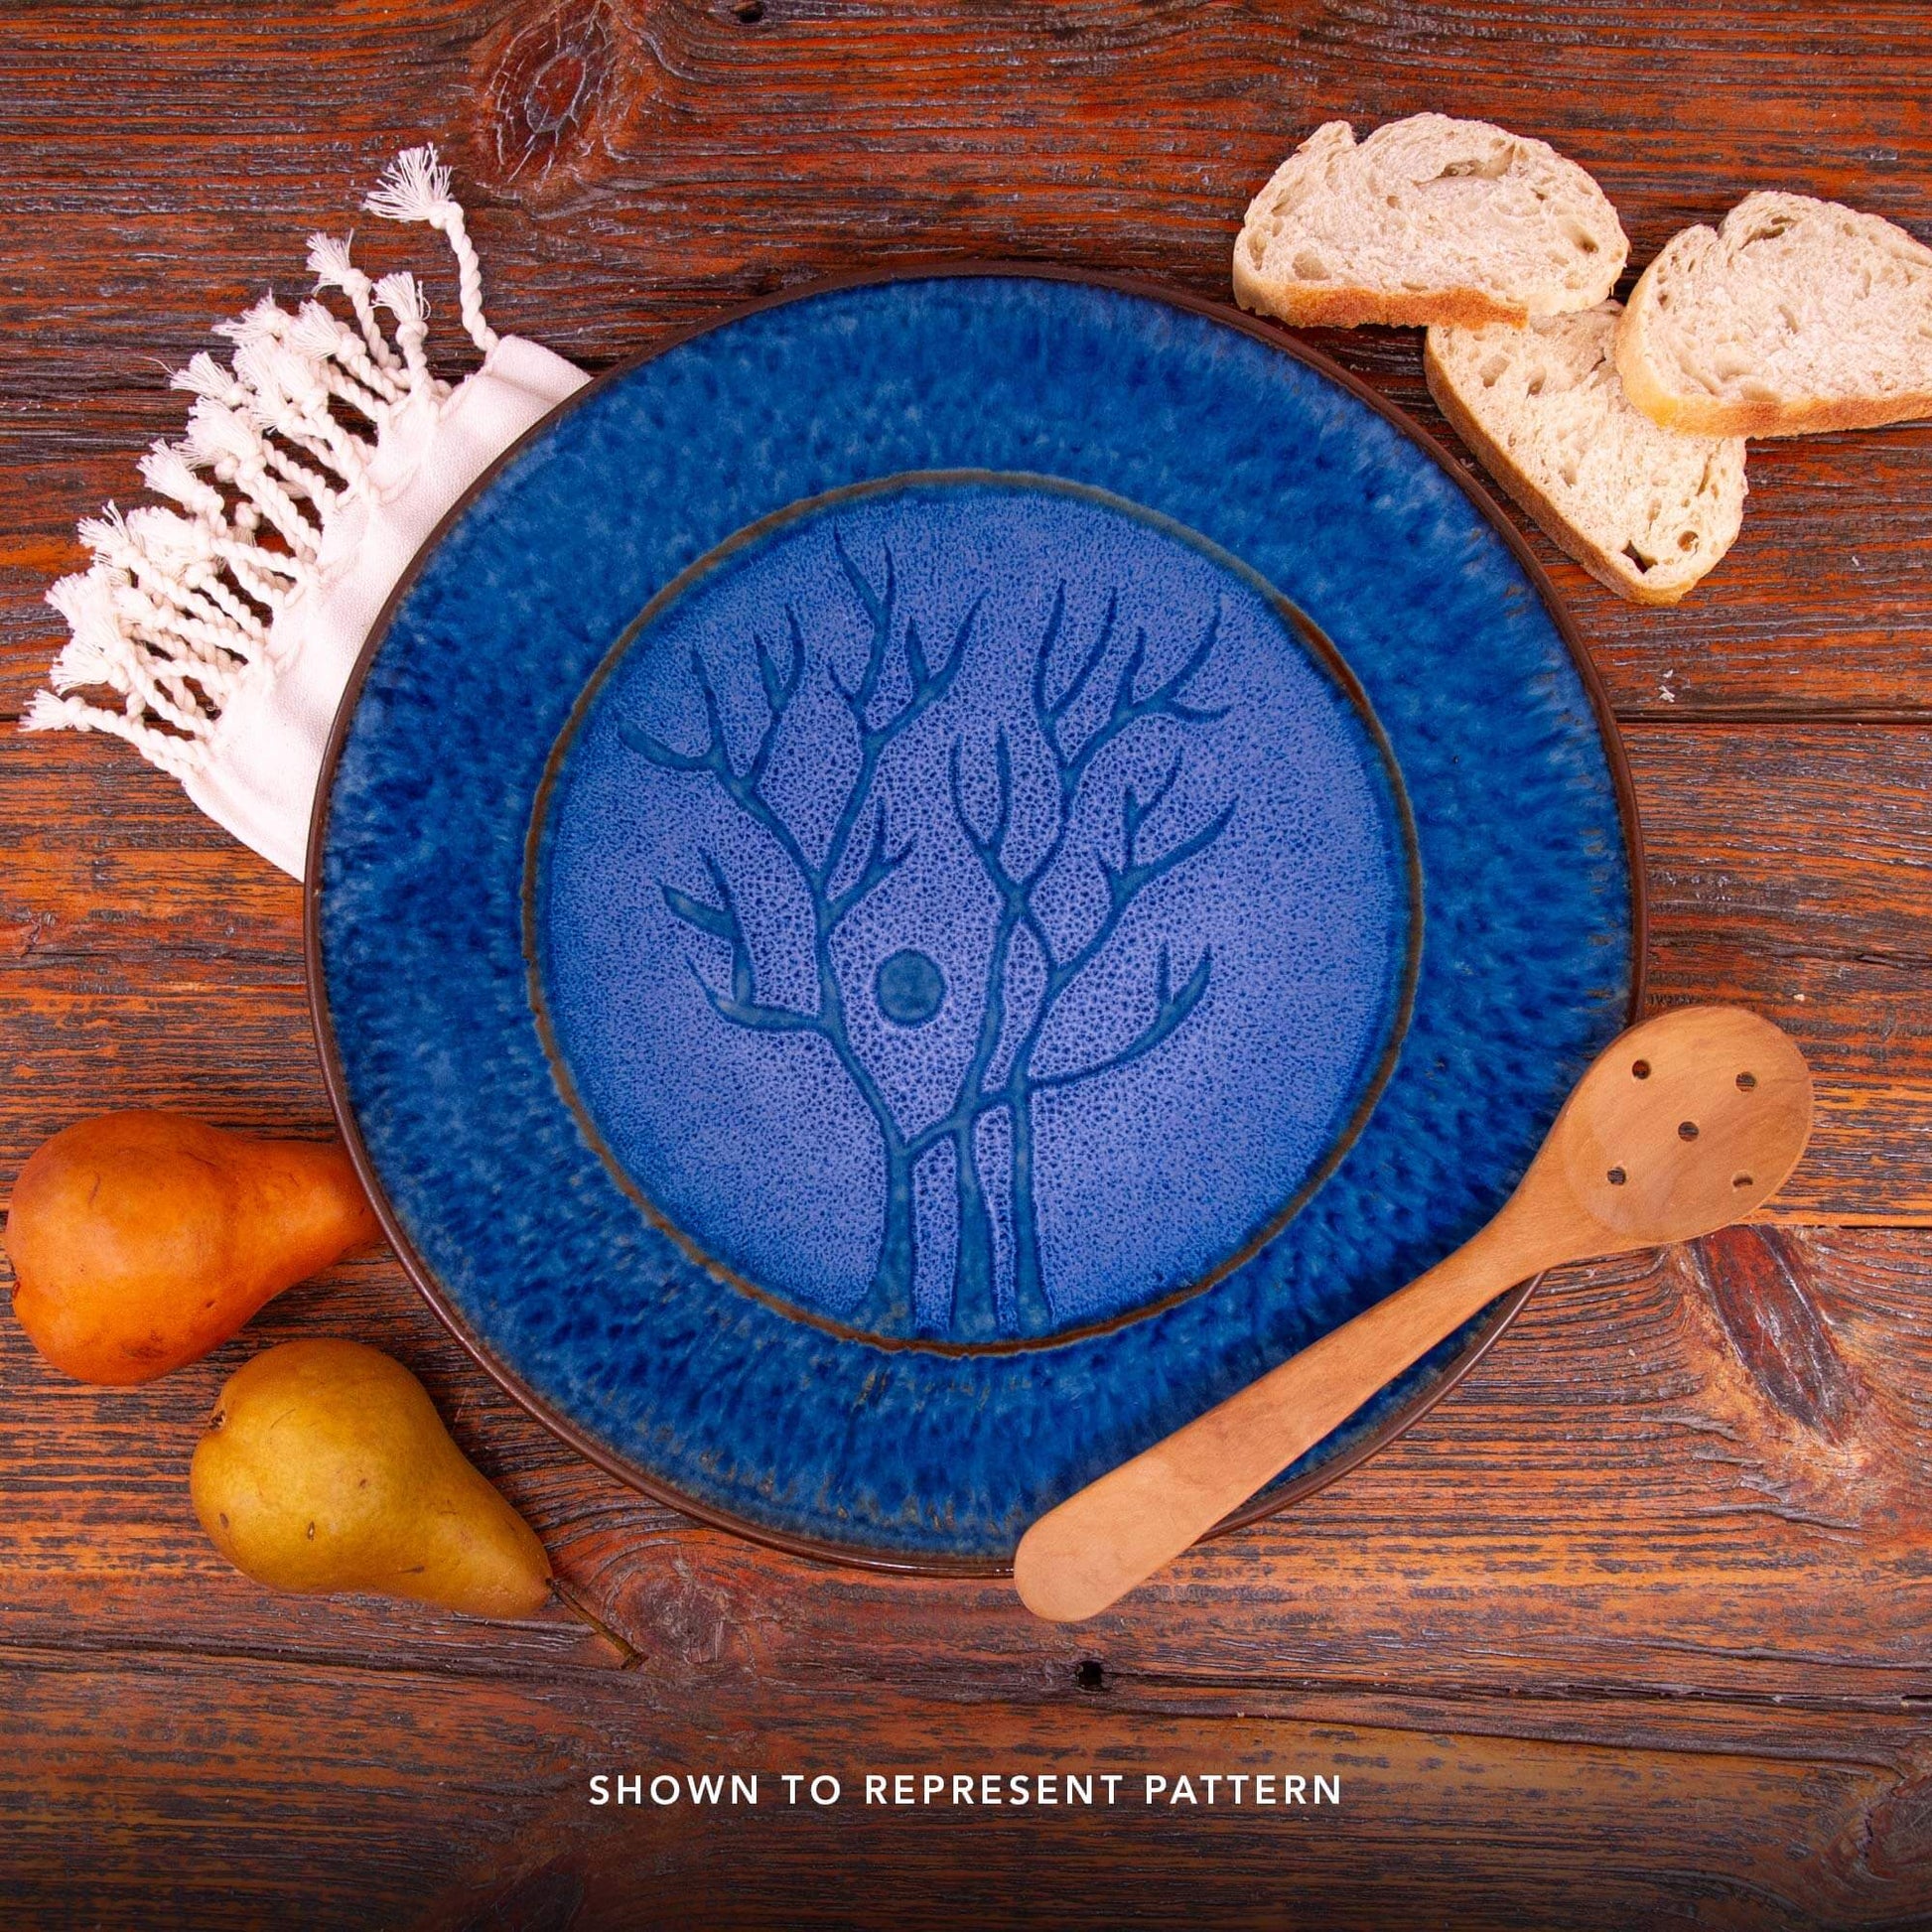 Handmade Pottery Small Clock w/ Stand in Blue Tree pattern made by Georgetown Pottery in Maine